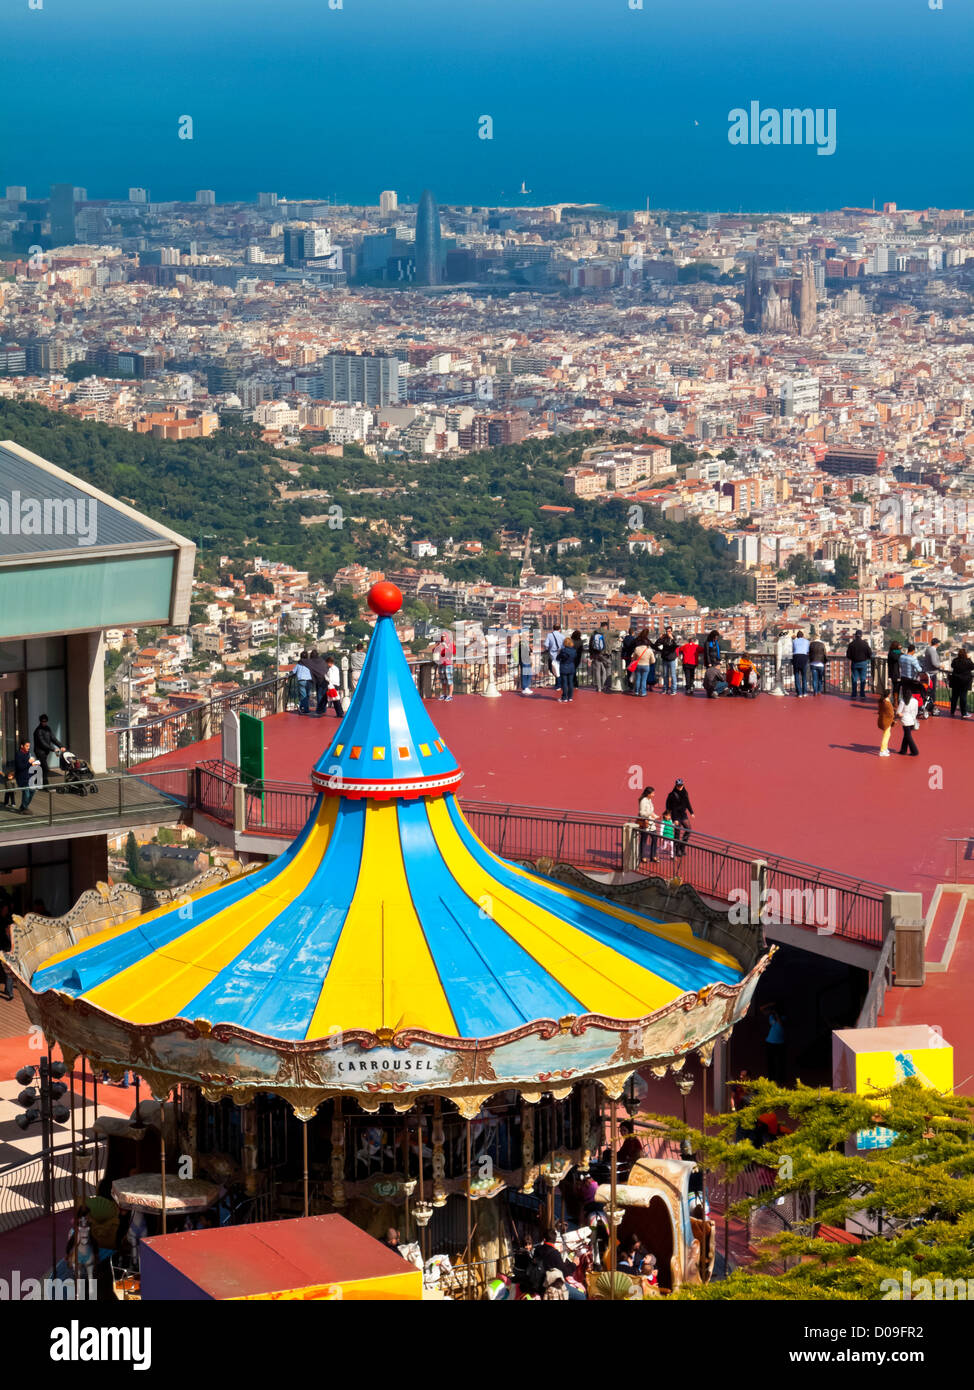 View over Tibidabo amusement park Barcelona Catalonia Spain showing carousel and view over city centre and the sea beyond Stock Photo